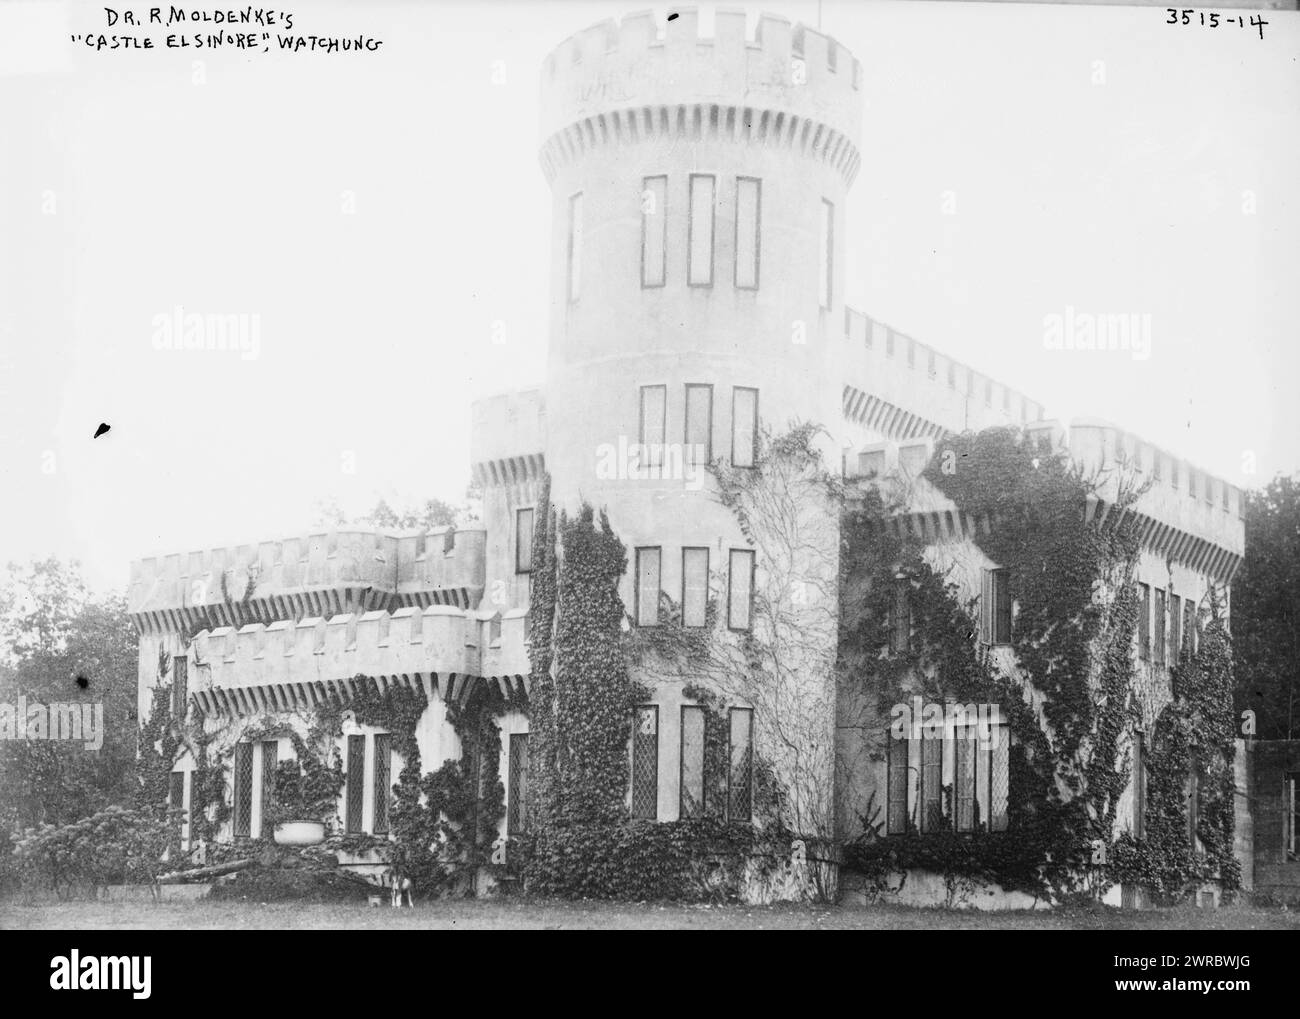 Dr. R. Moldenke's 'Castle Elsinore', Watchung, Photograph shows Castle Elsinore, the home of metallurgist Dr. Richard Moldenke in Watchung, New Jersey. The building burned in 1969., between ca. 1910 and ca. 1915, Glass negatives, 1 negative: glass Stock Photo